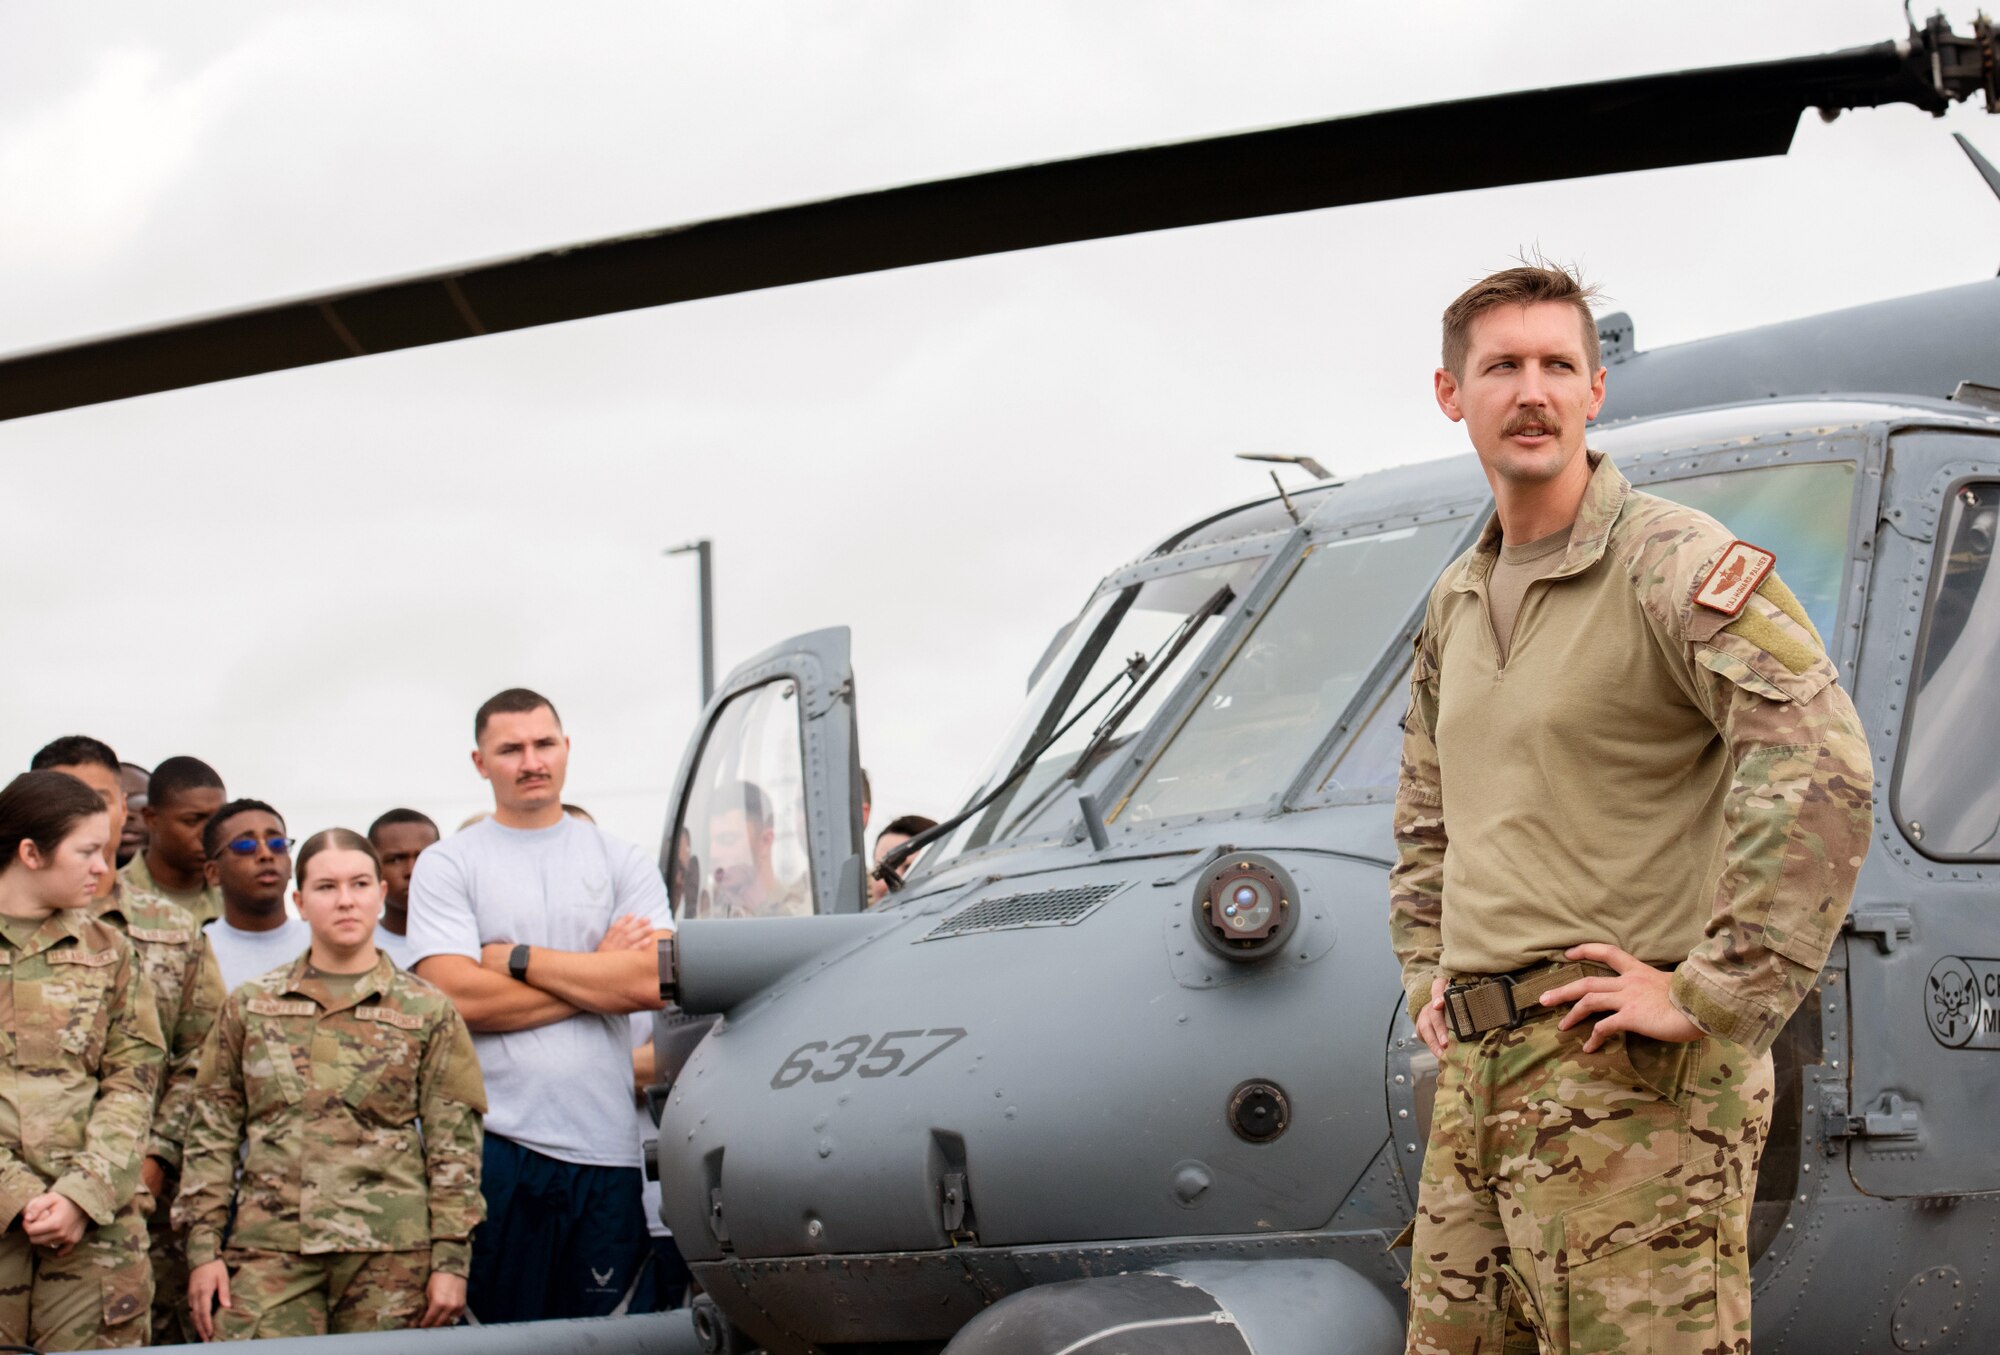 HH-60 Pave Hawk aircrew visits 37th Training Group students